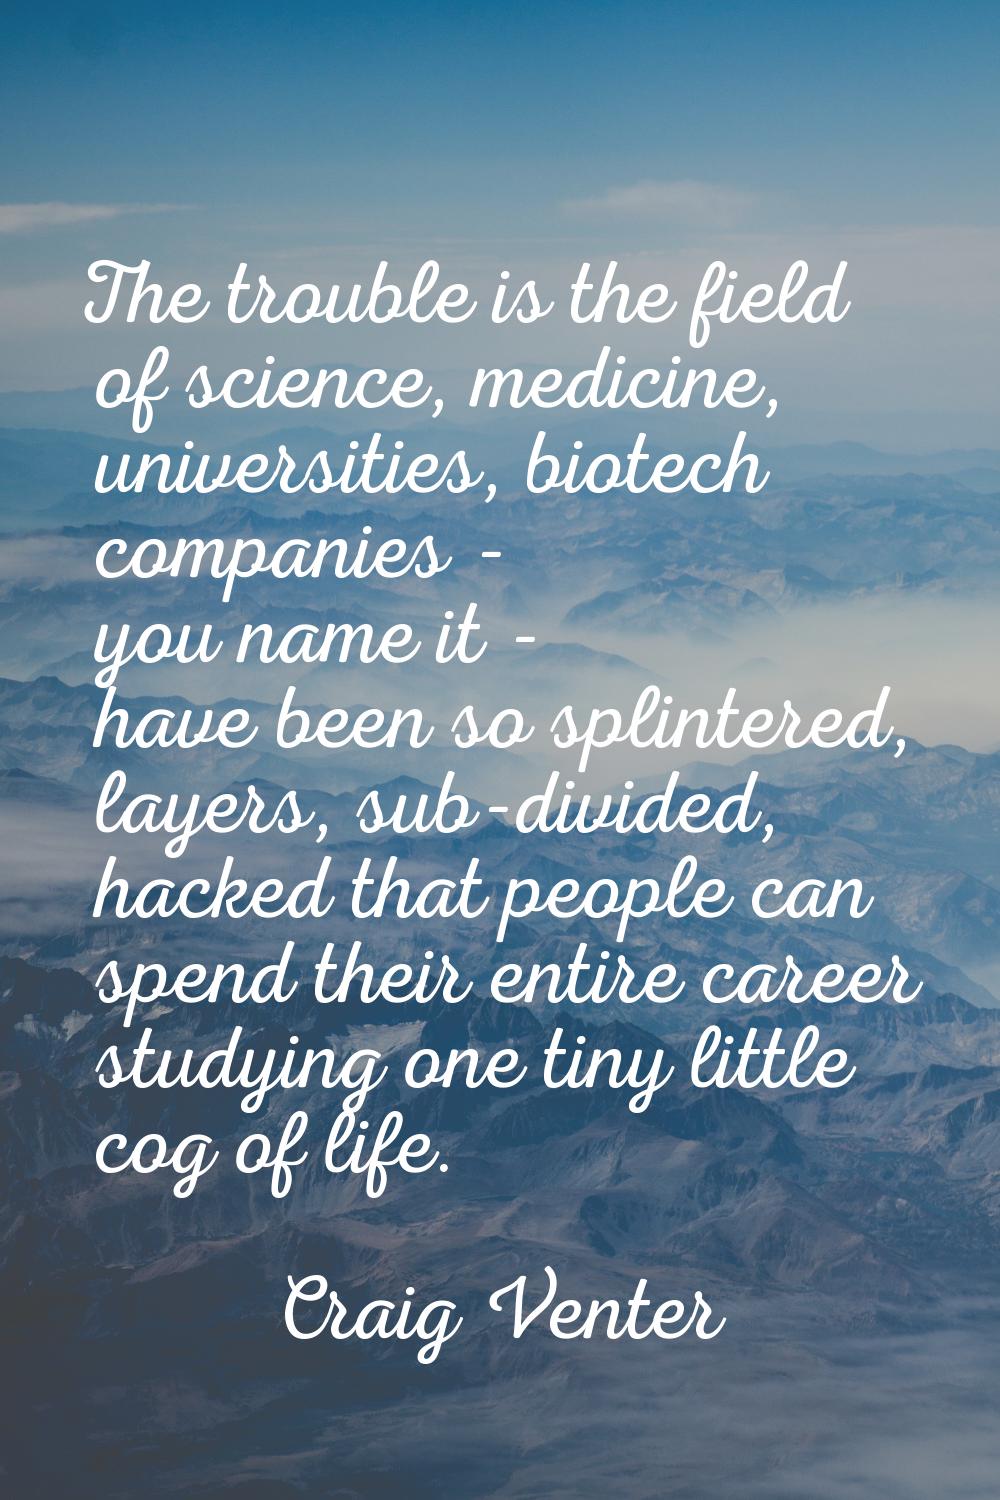 The trouble is the field of science, medicine, universities, biotech companies - you name it - have